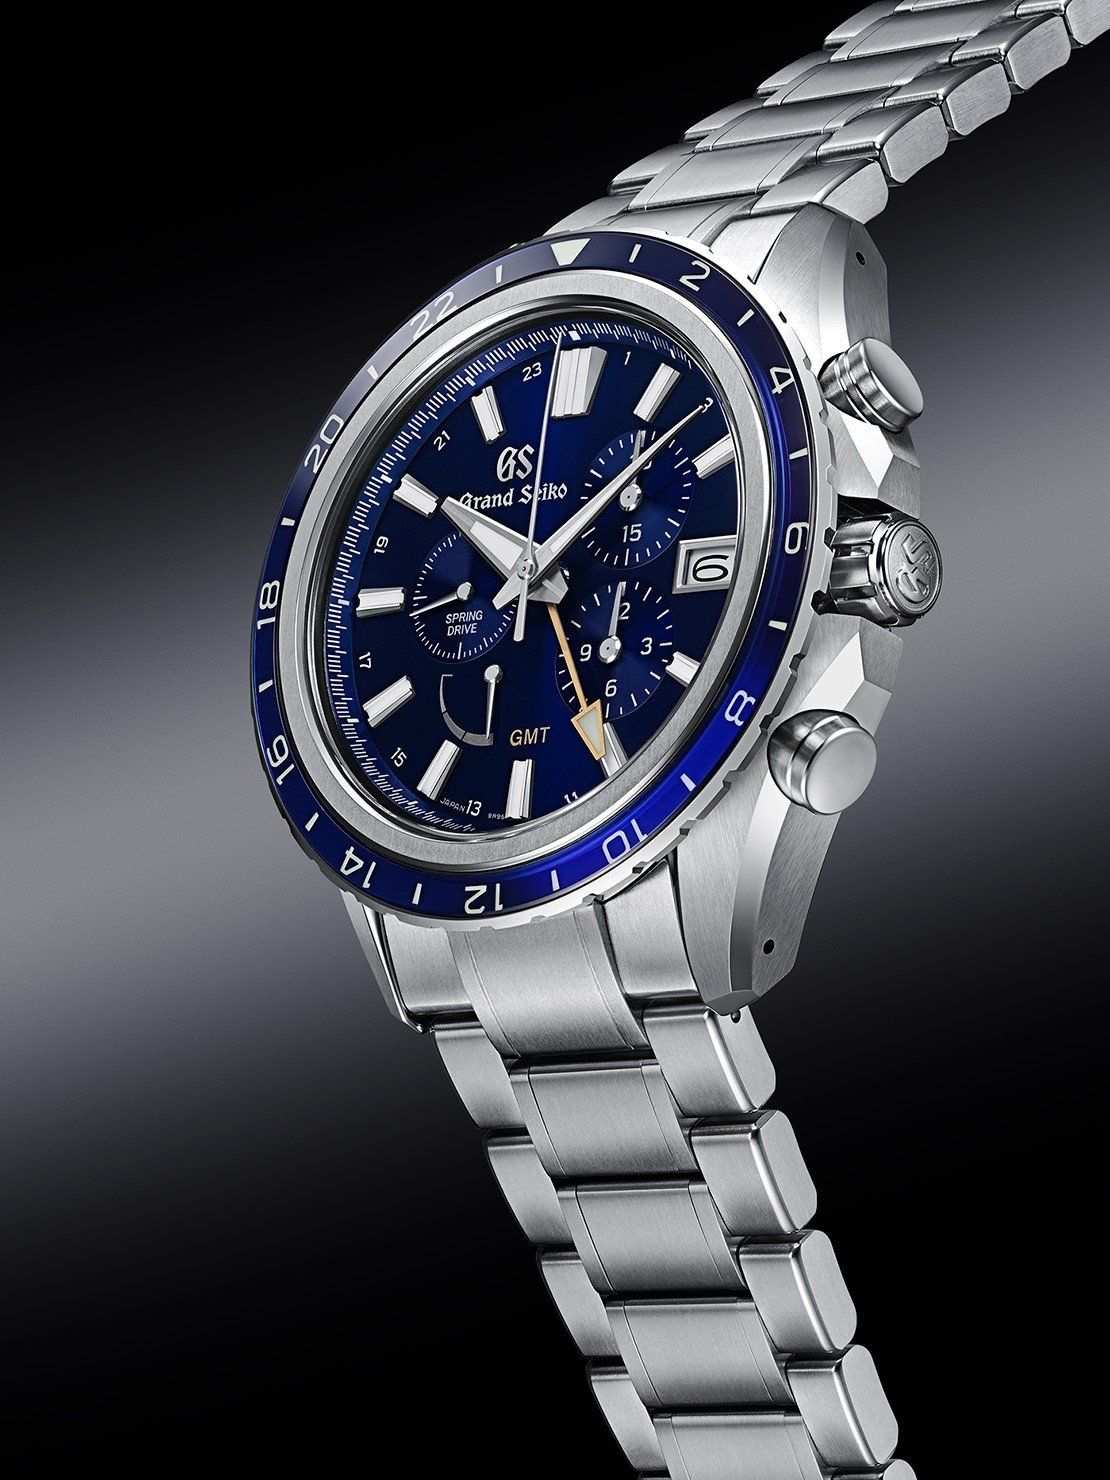 The first of the two chronographs features a blue dial